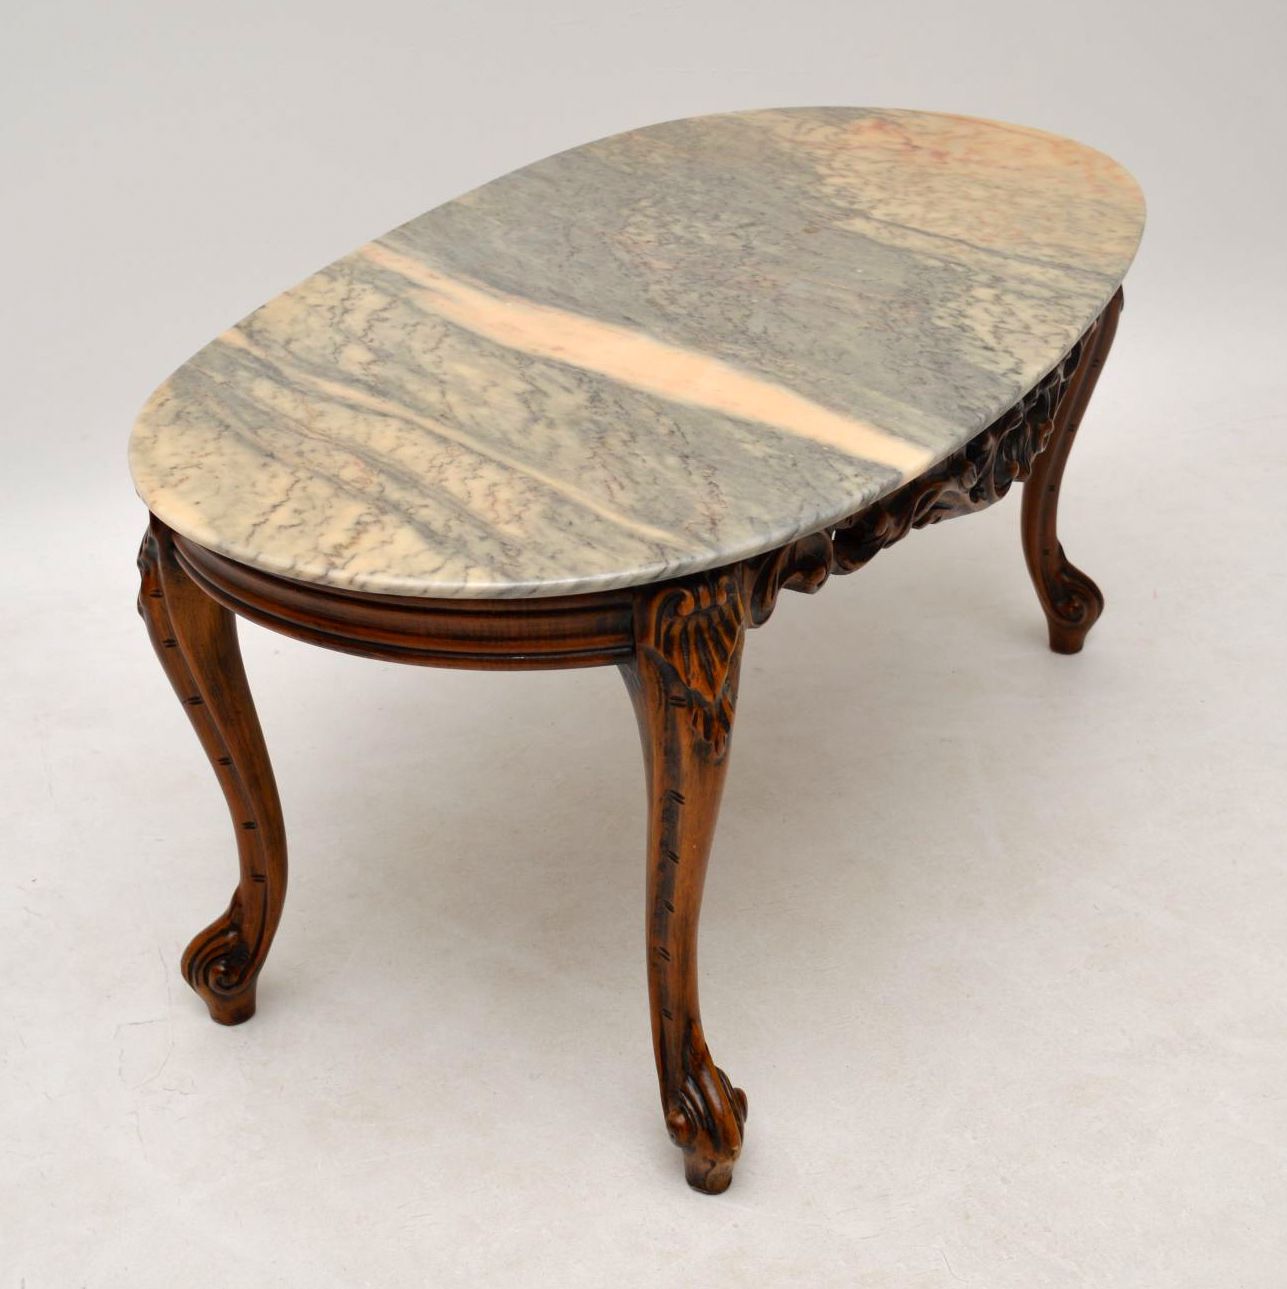 Antique French Style Marble Top Coffee Table – Marylebone For Marble Top Coffee Tables (View 2 of 15)